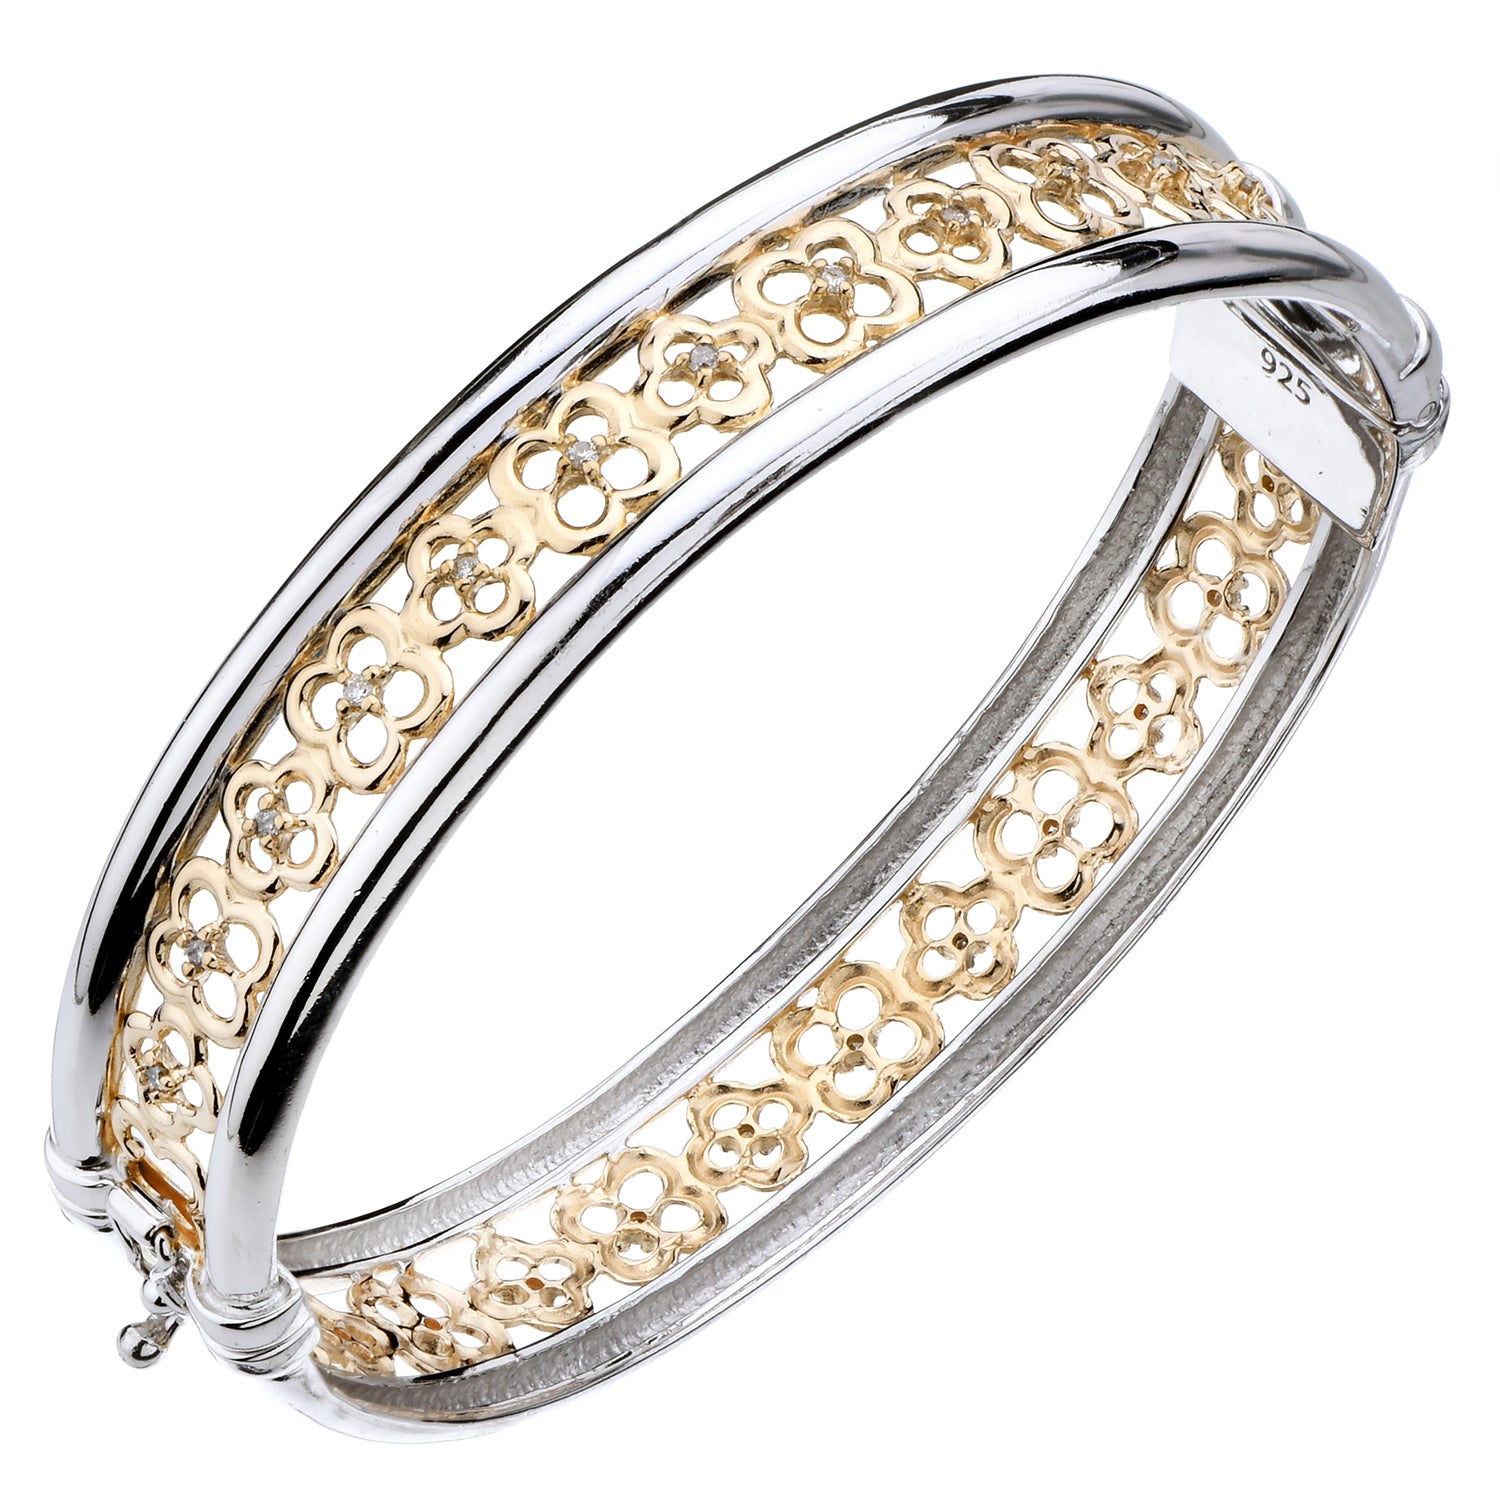 1/4 cttw Diamond Bangle Bracelet Yellow Gold Plated Over Sterling Silver